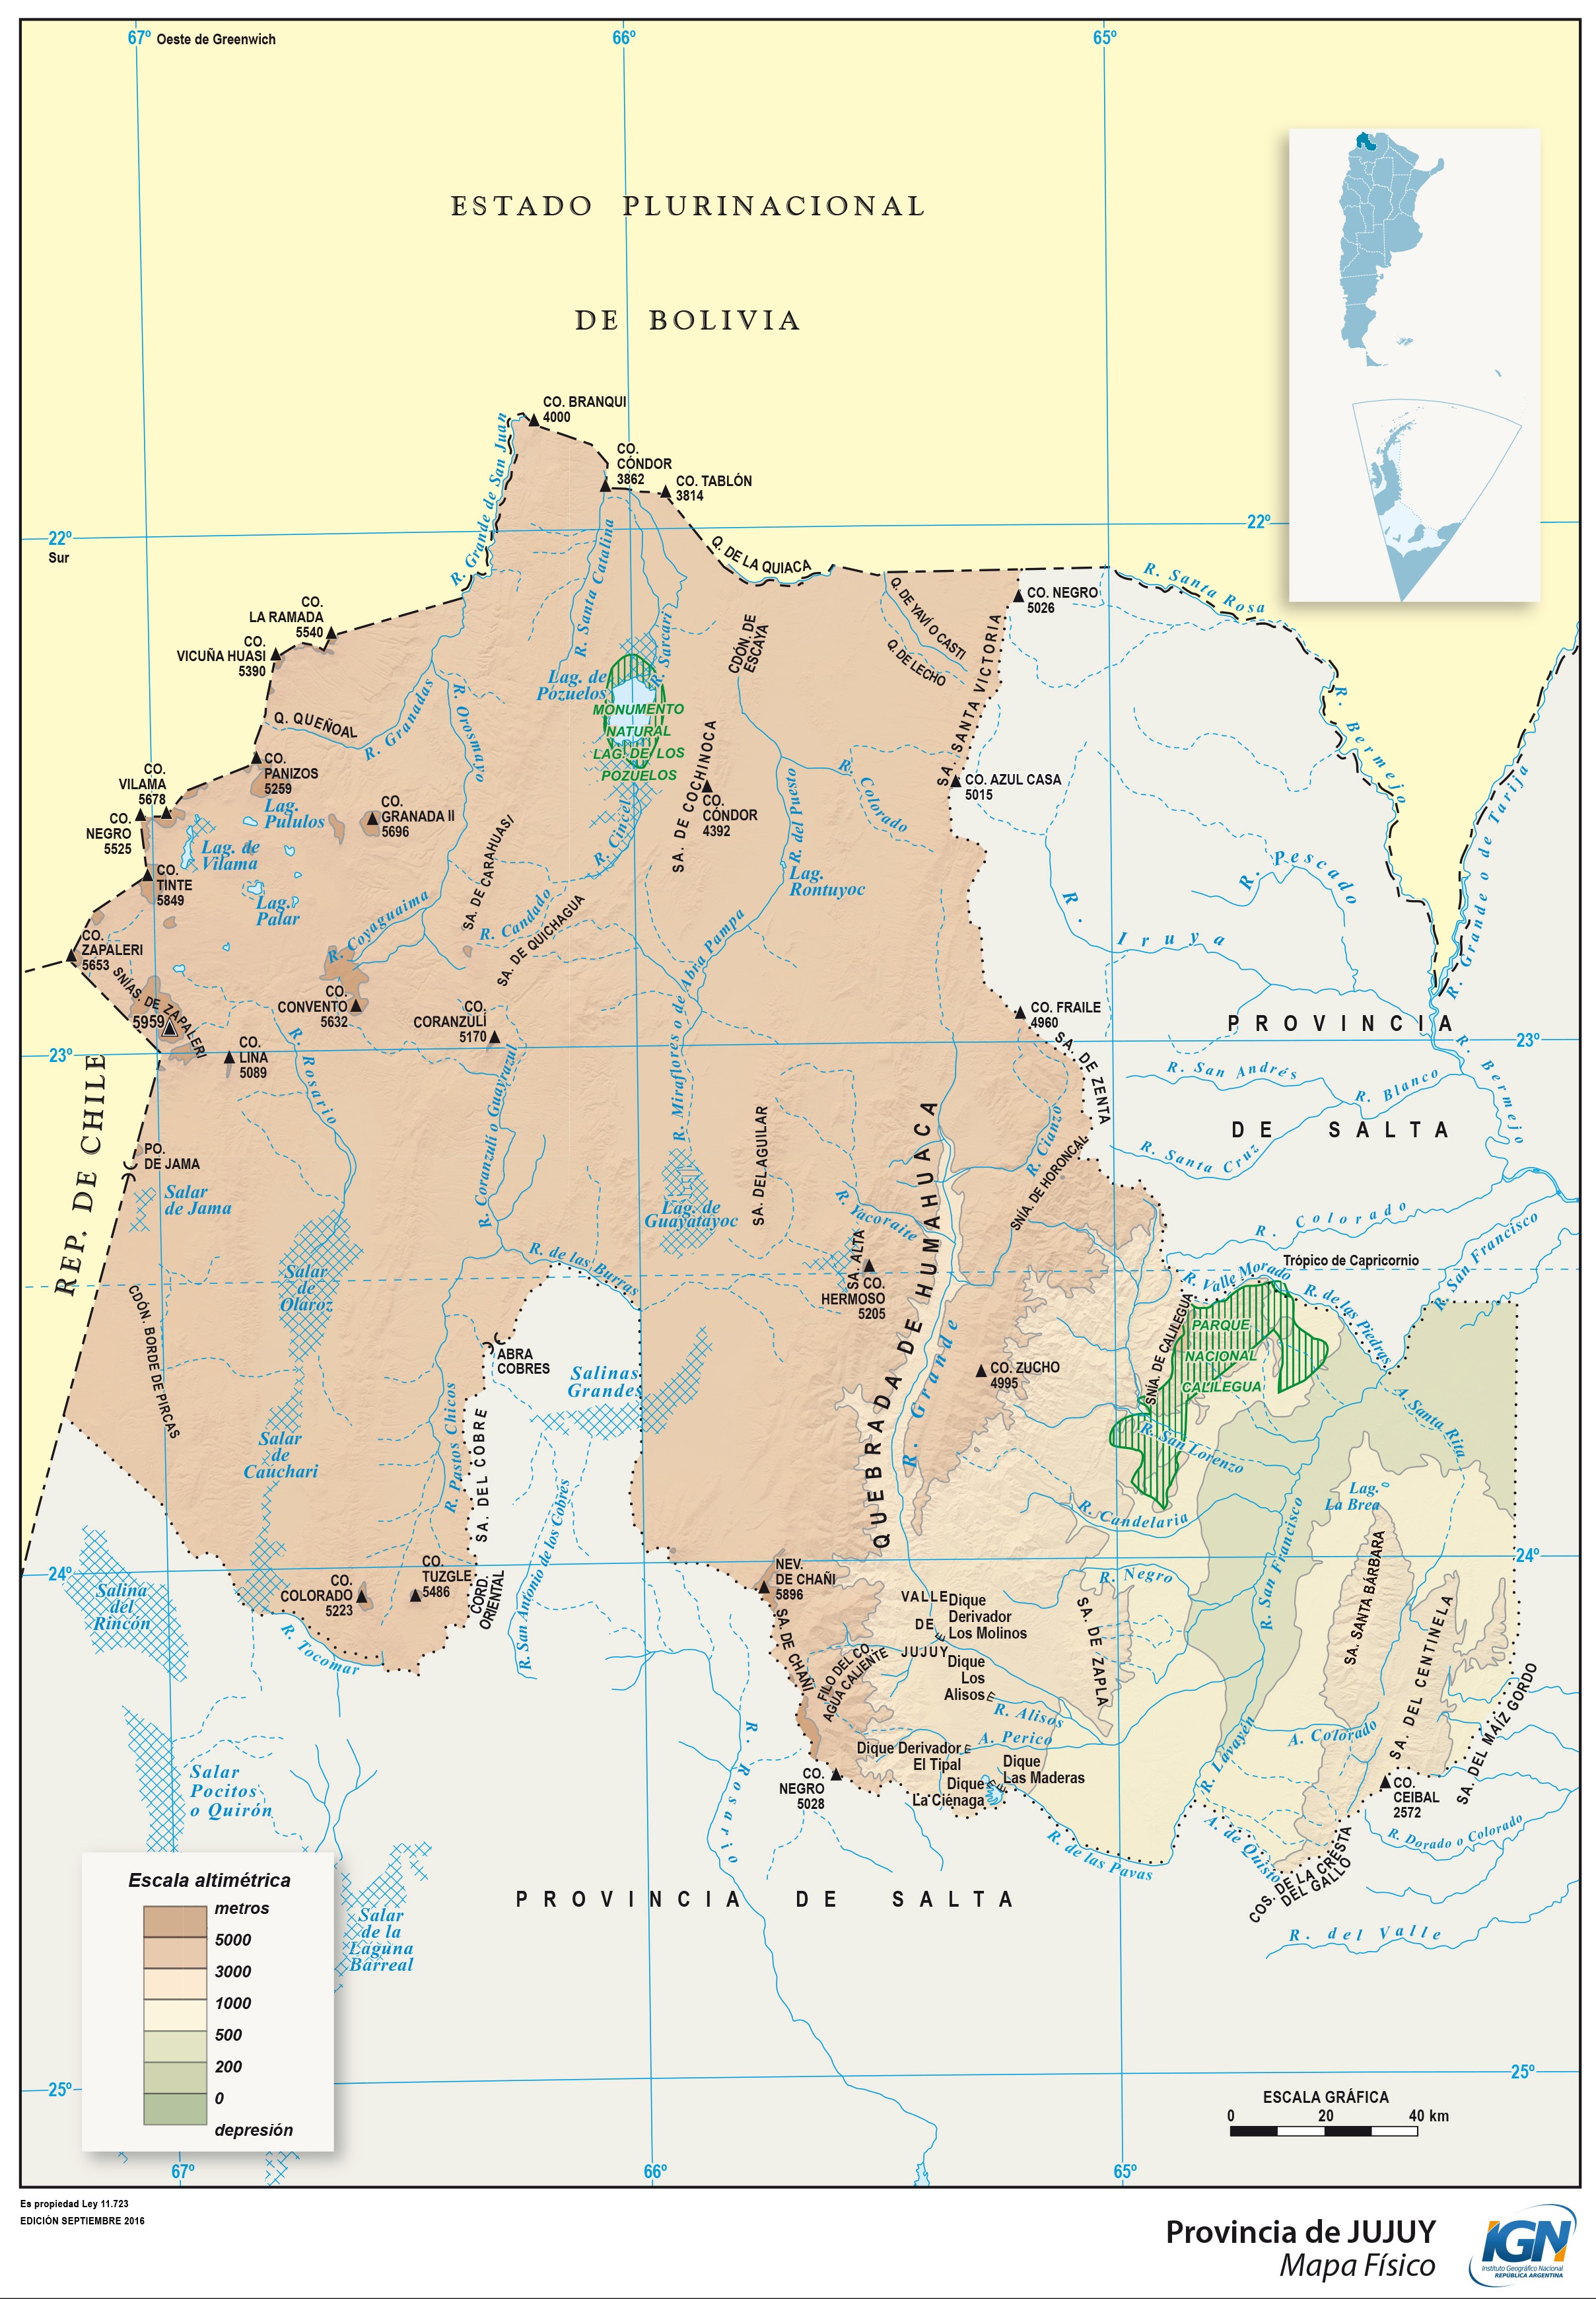 Jujuy - Physical map of the Province of Jujuy, Argentina | Gifex